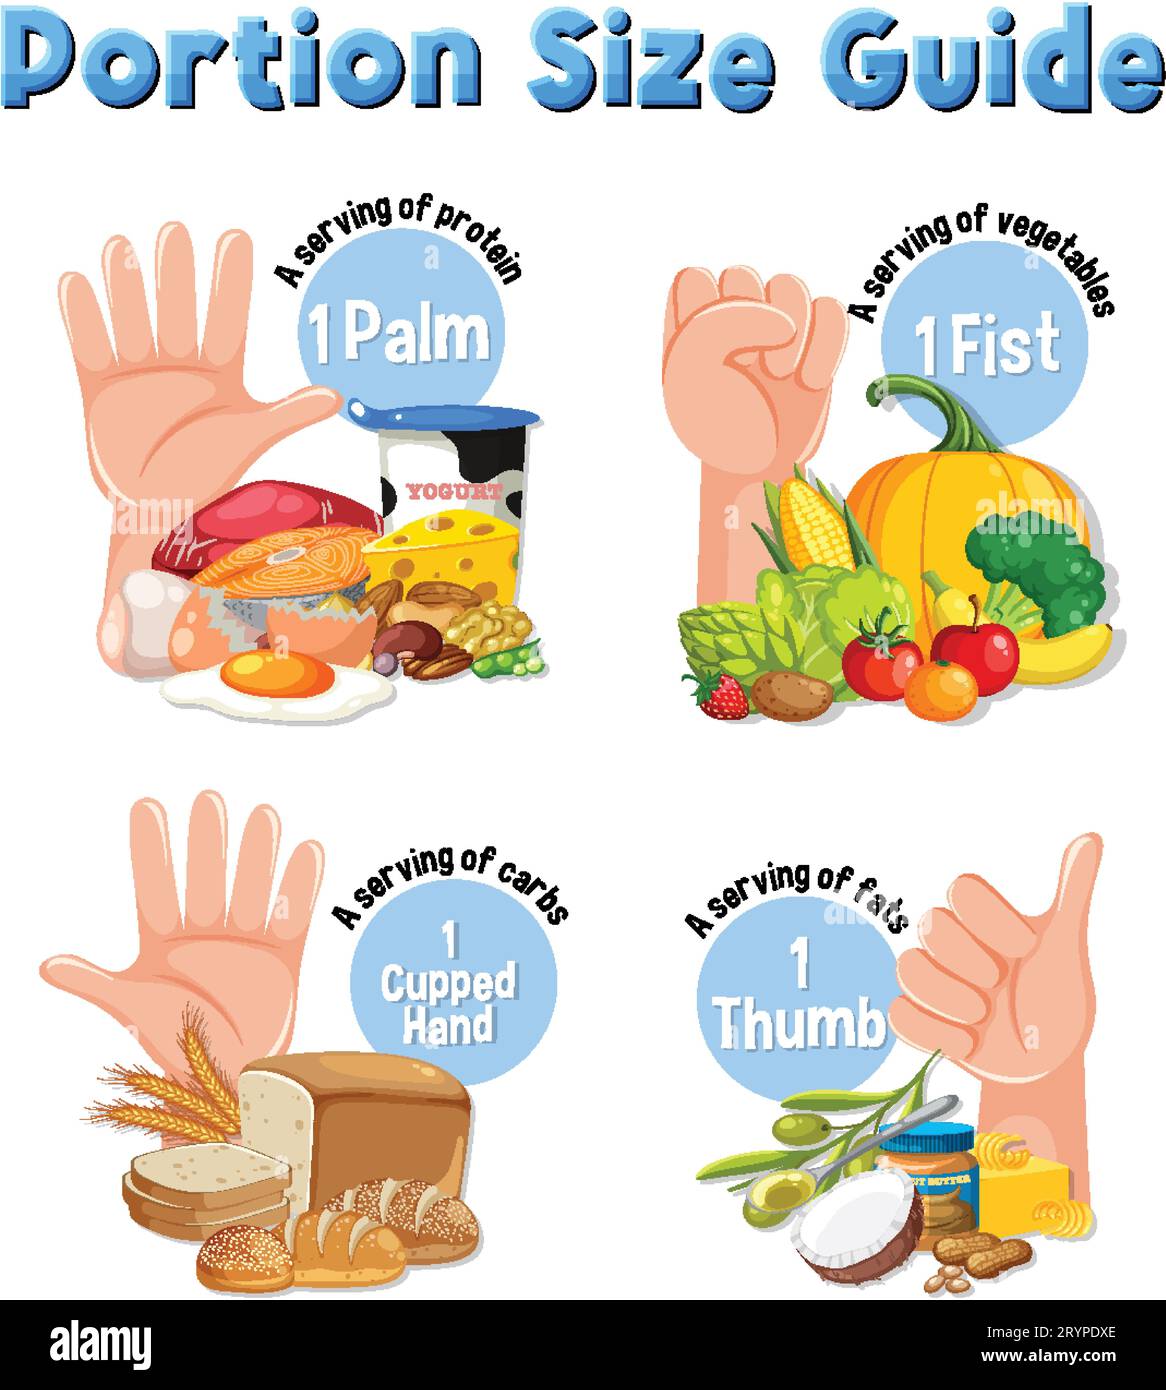 Portion Control: Comparing Food Nutrition with Human Hand illustration Stock Vector